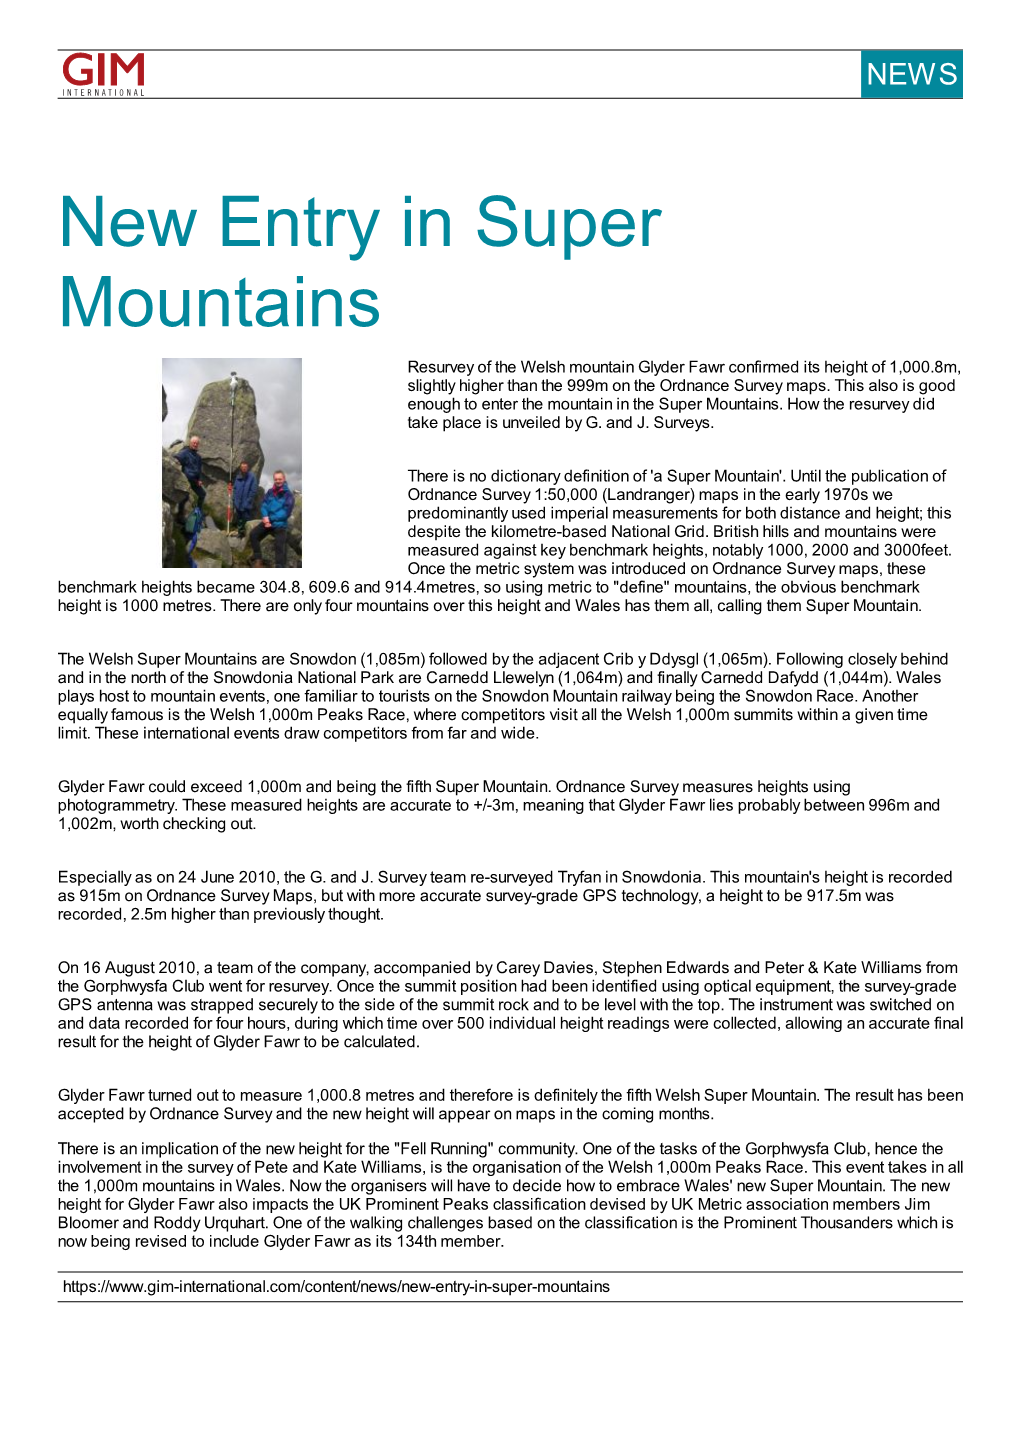 New Entry in Super Mountains